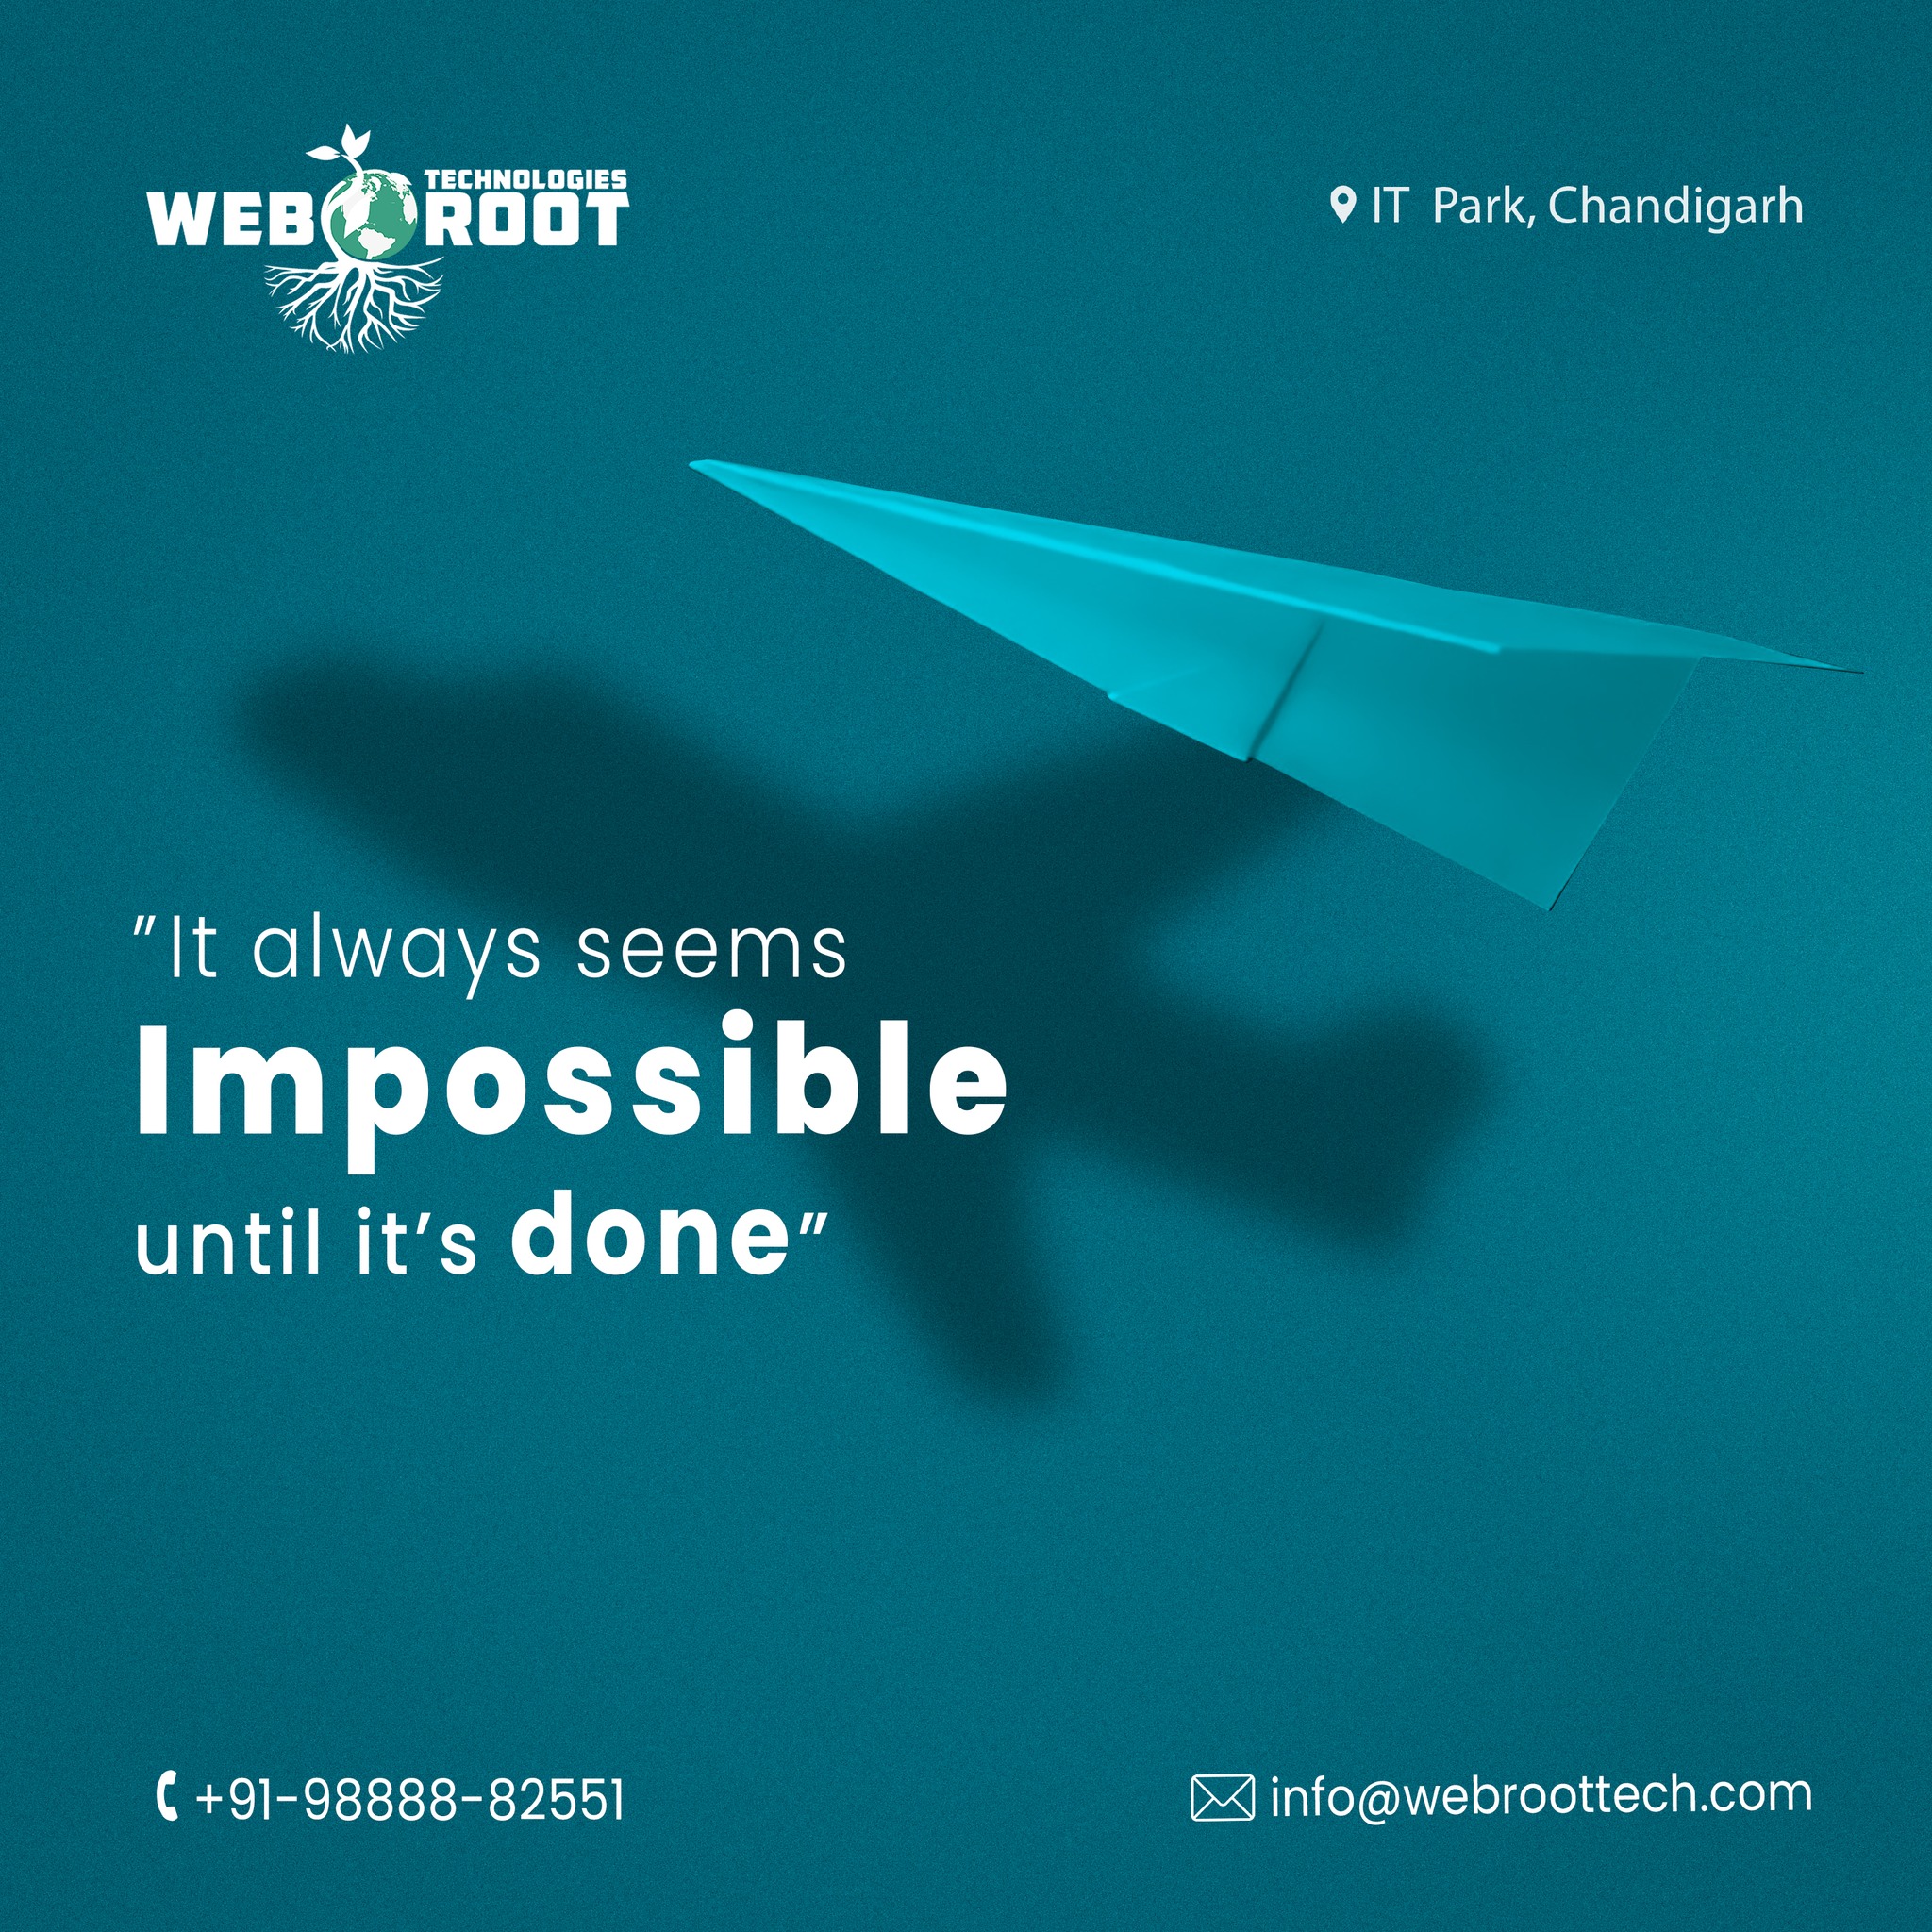 It always seems impossible, until it's done. But one must remember, that history is filled with great names, who believed in the impossible and worked on something out of the box. Success is never guaranteed but great failures teach great lessons. Risks are the opportunities we all must take. 

At Webroot Technologies, we believe that to conquer competition one must walk apart from a herd of sheep. Take risks and make your brand name with dynamic digital marketing strategies. A harmless risk is nothing but an opportunity waiting for you. 

Get In Touch With Us:
https://webroottech.com/
📞: +91-9888882551
📧: info@webroottech.com

#success #successful #competition #fly #lessons #risk #opportunity #digitalmarketing #marketingstrategies #SEO #SMM #SMO #ppc #googleadwords #facebookads  #advertisements  #branding #digitalcompany #designer #business  #brandidentity #branding  #graphicdesigning #creativity #marketing #logo #logodesigner #logoprocess #brandmark  #Webroottechnologies